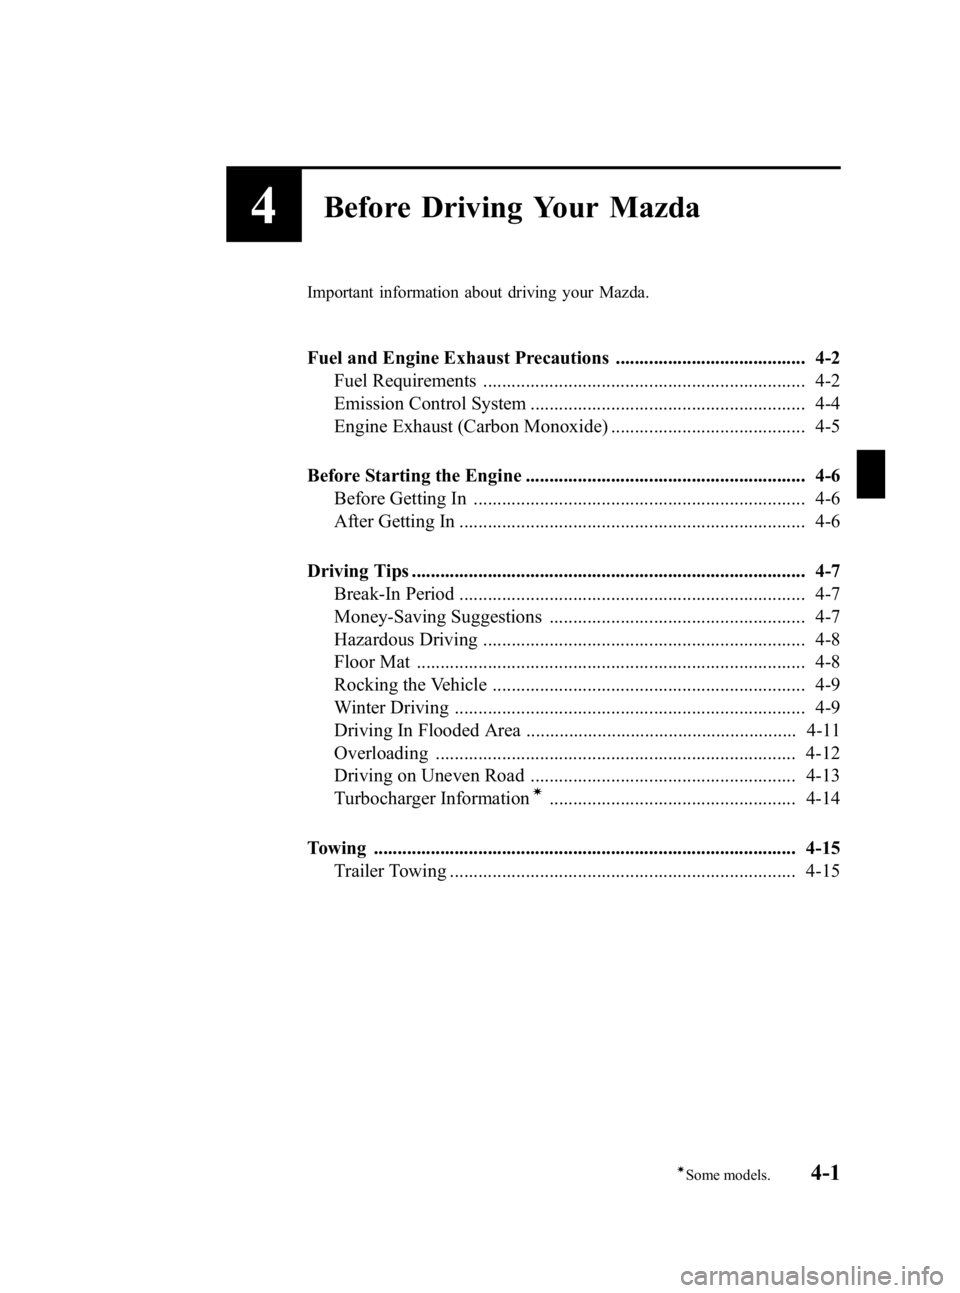 MAZDA MODEL 3 5-DOOR 2010  Owners Manual Black plate (145,1)
4Before Driving Your Mazda
Important information about driving your Mazda.
Fuel and Engine Exhaust Precautions ........................................ 4-2Fuel Requirements .......